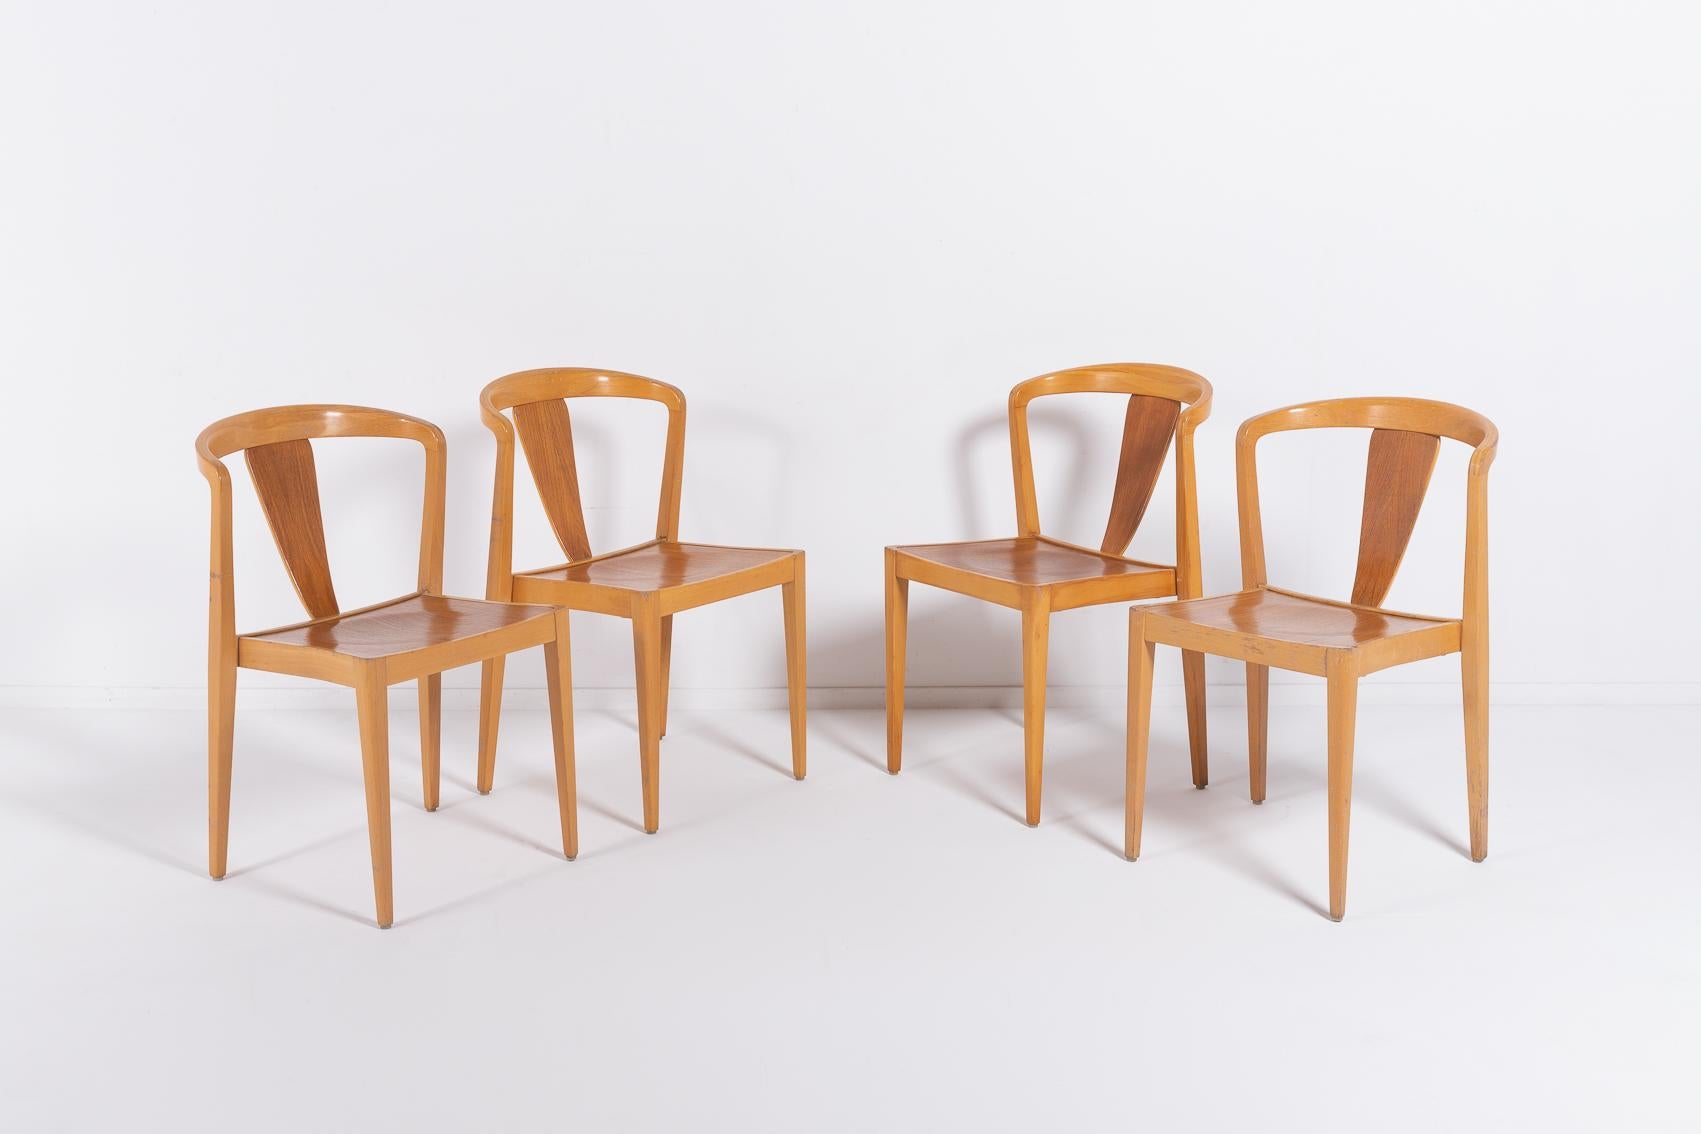 Elegant chairs designed by Axel Larsson in the 1960s for Bodafors. The chairs has a varnished maple frame with a seat and backrest support intake veneer. Nice scandinavian design with amazing curve.

Condition
Good, age related